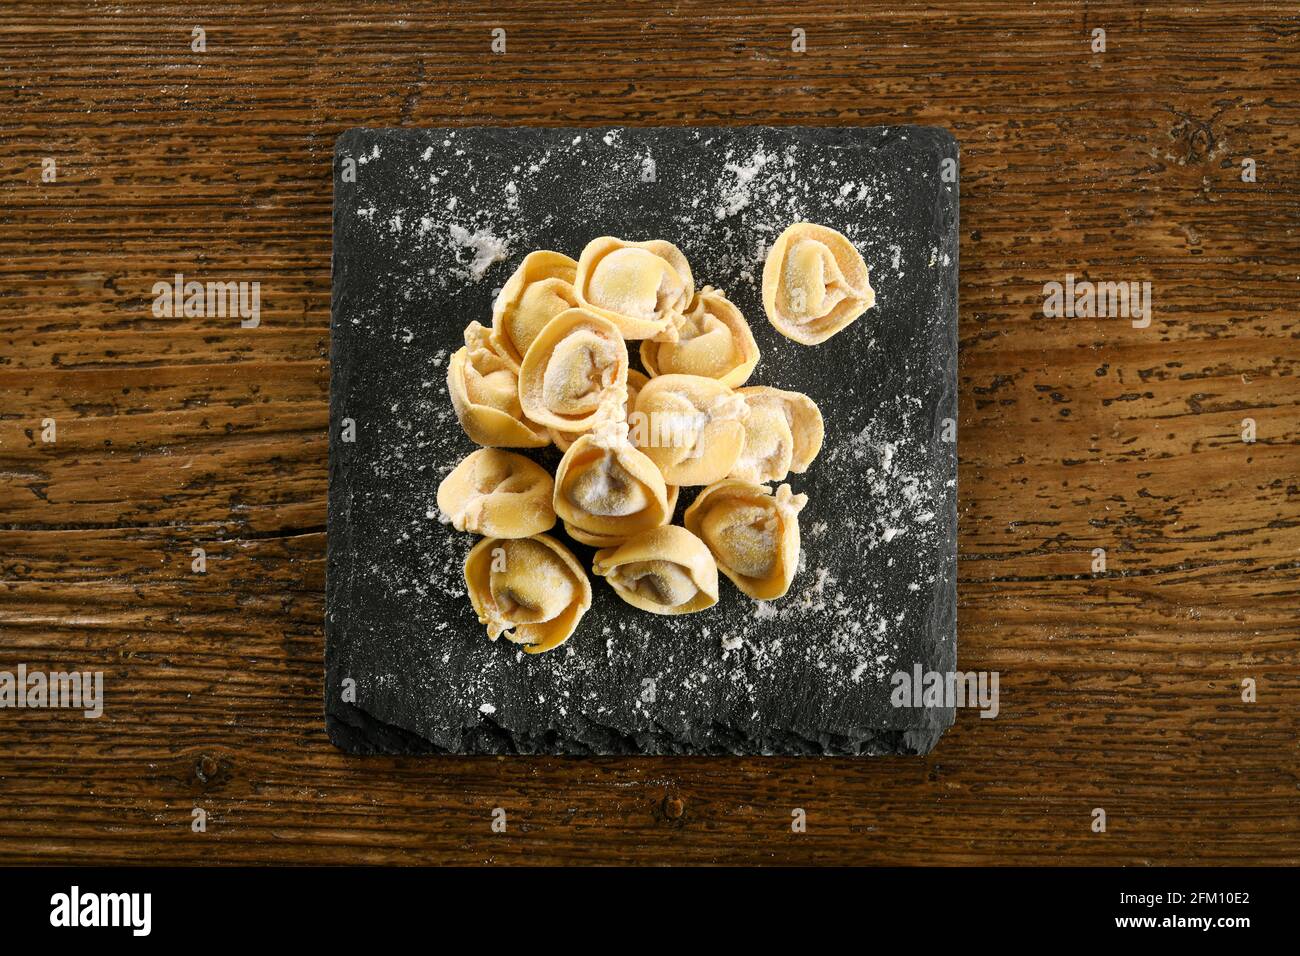 Top view of traditional Italian handmade cappelletti pasta on black board sprinkled with flour placed on wooden table Stock Photo